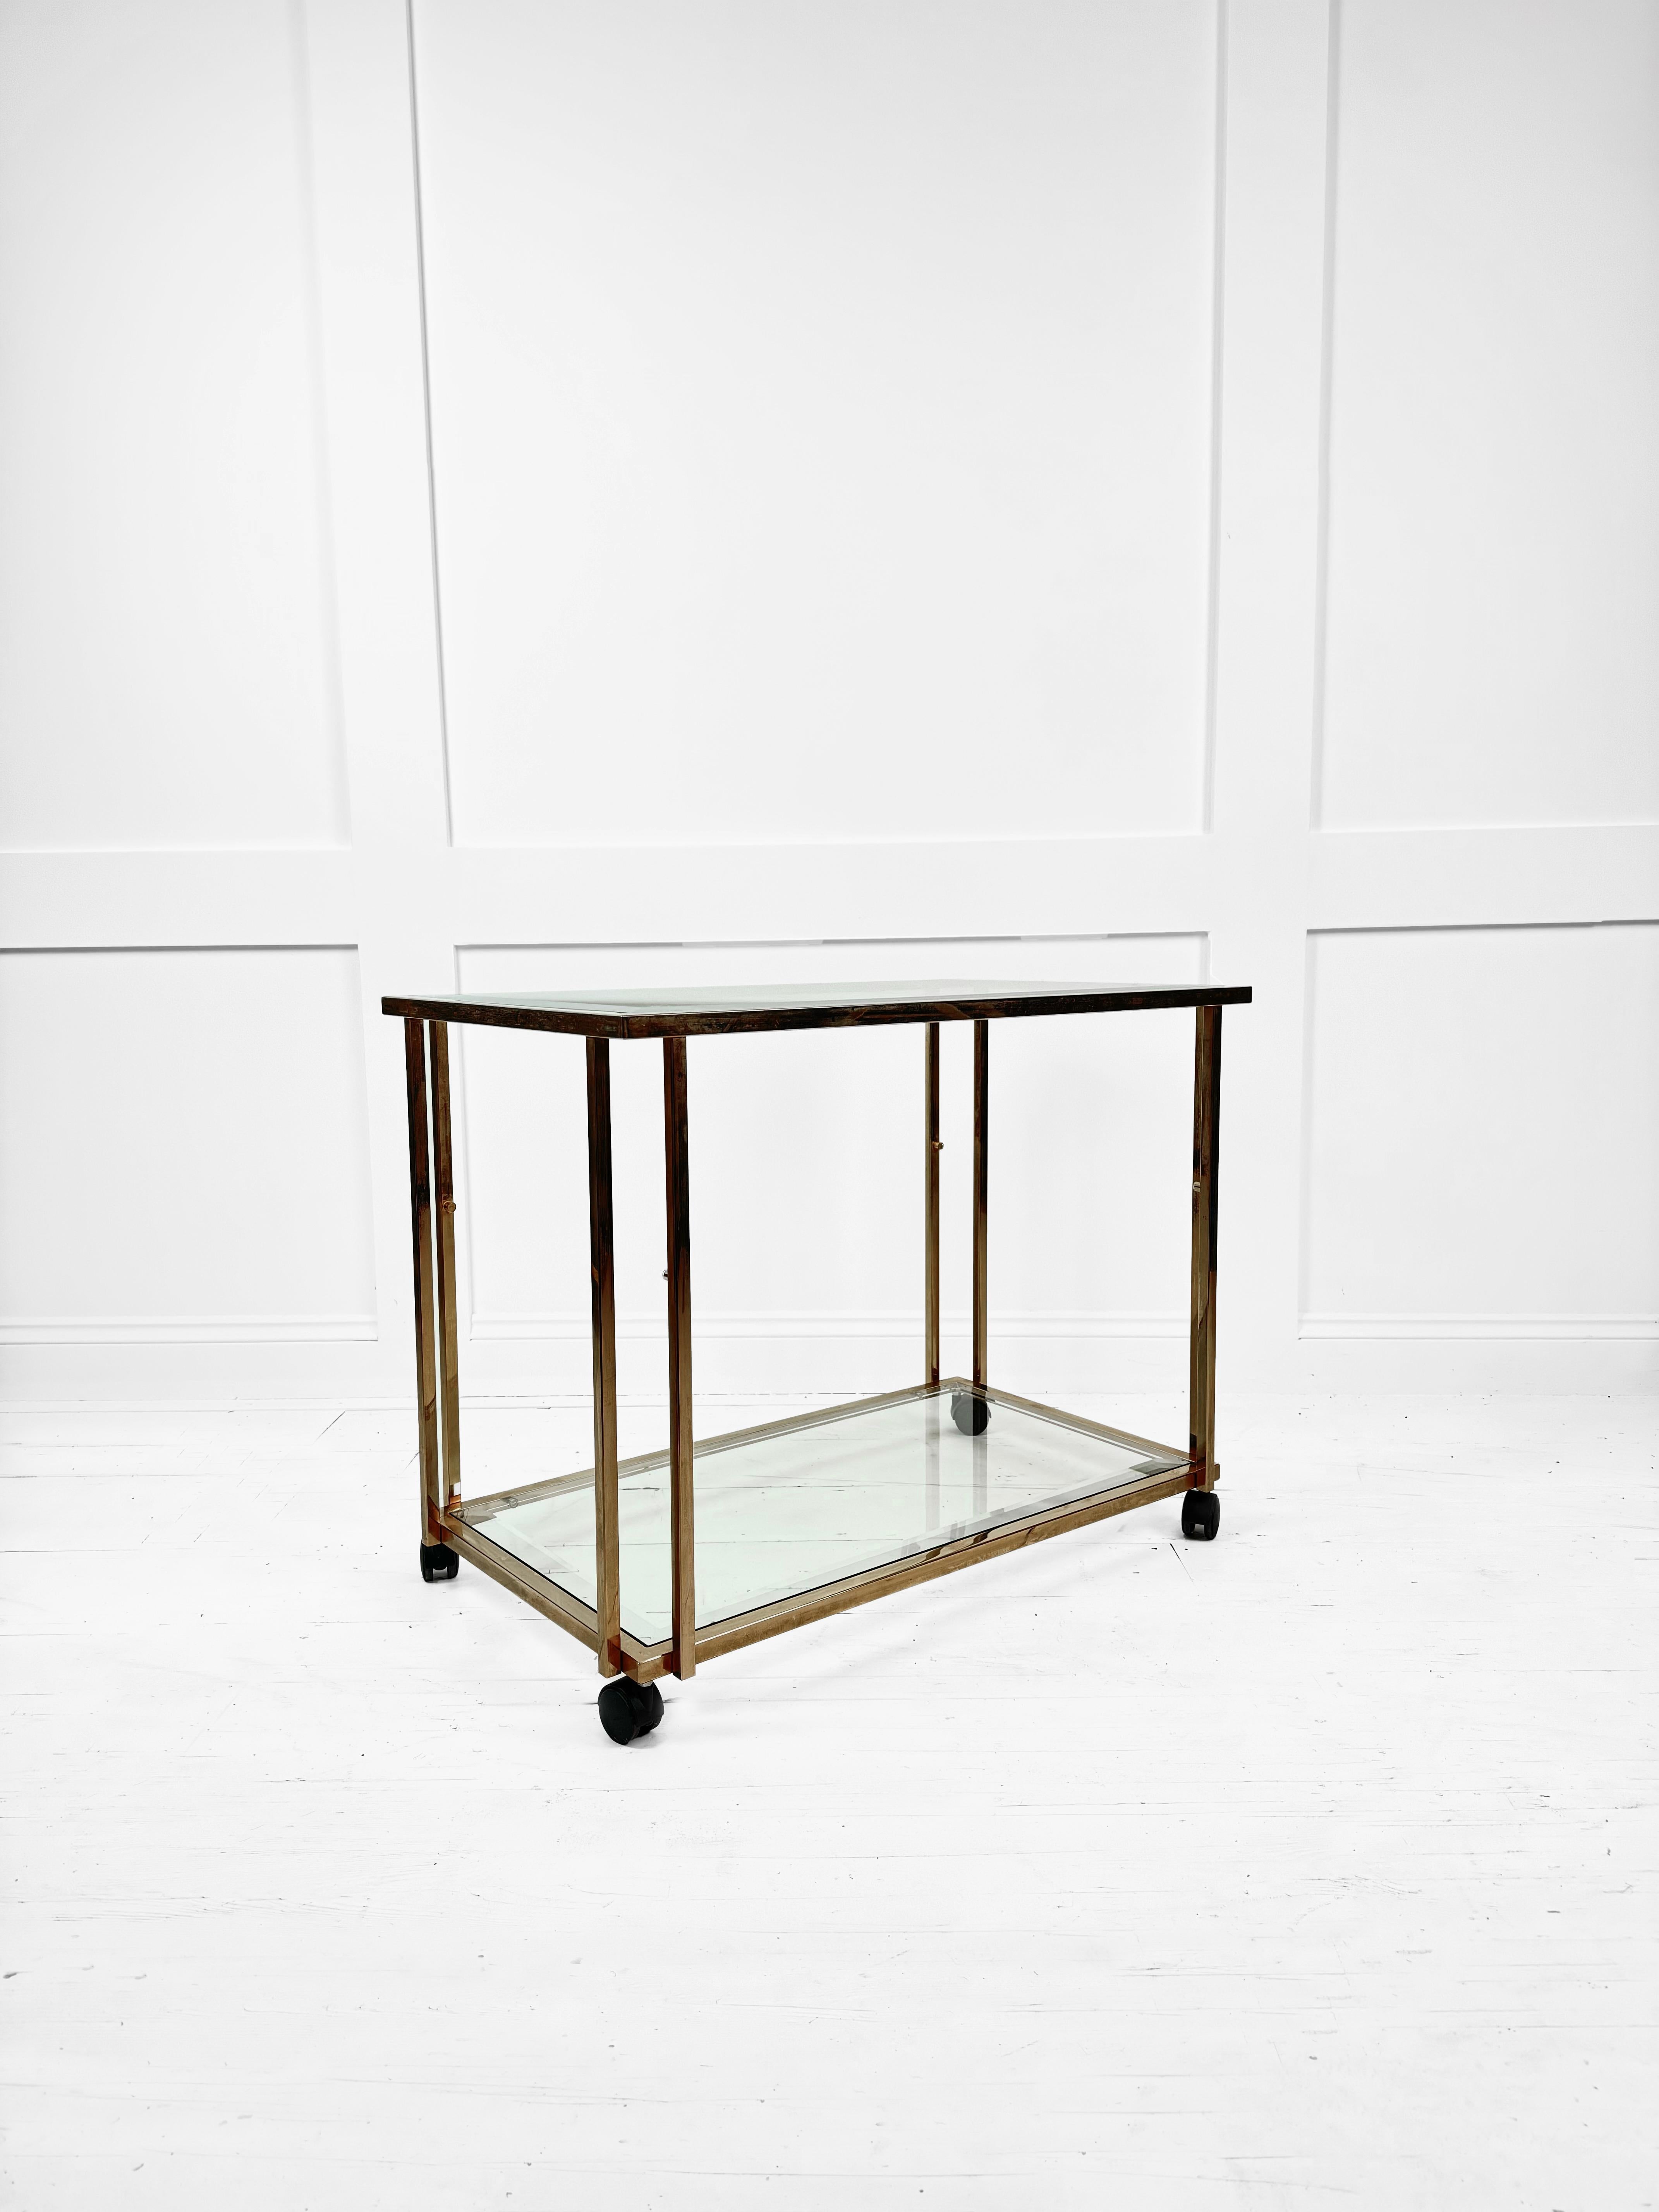 A distinctive touch of vintage elegance with this stunning Brass and Bevel Glass Drinks Trolley from Belgium, dating back to the 1980's. The trolley features a sleek brass frame with decorative detailing and a bevel glass top and bottom shelf that